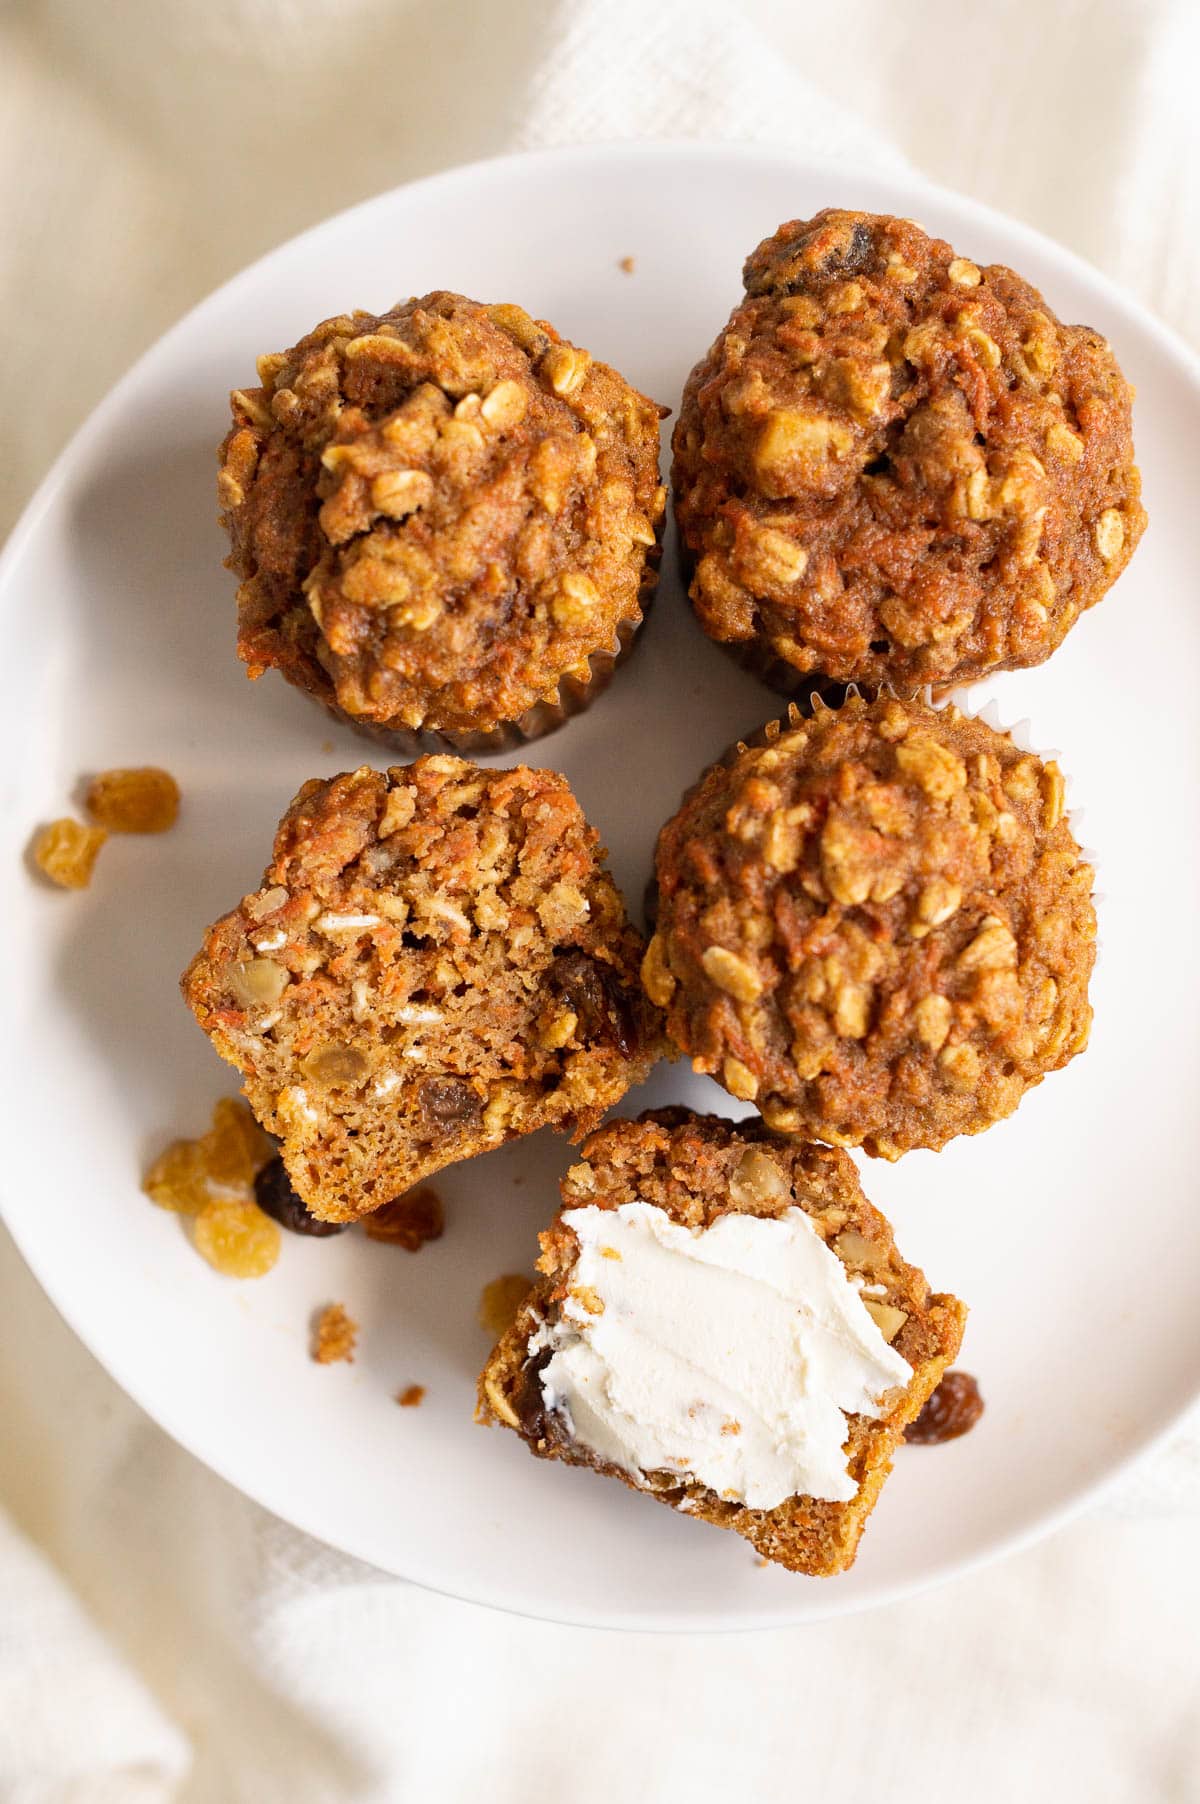 Healthy carrot muffin cut in half and spread with cream cheese and more muffins and raisins on a plate.